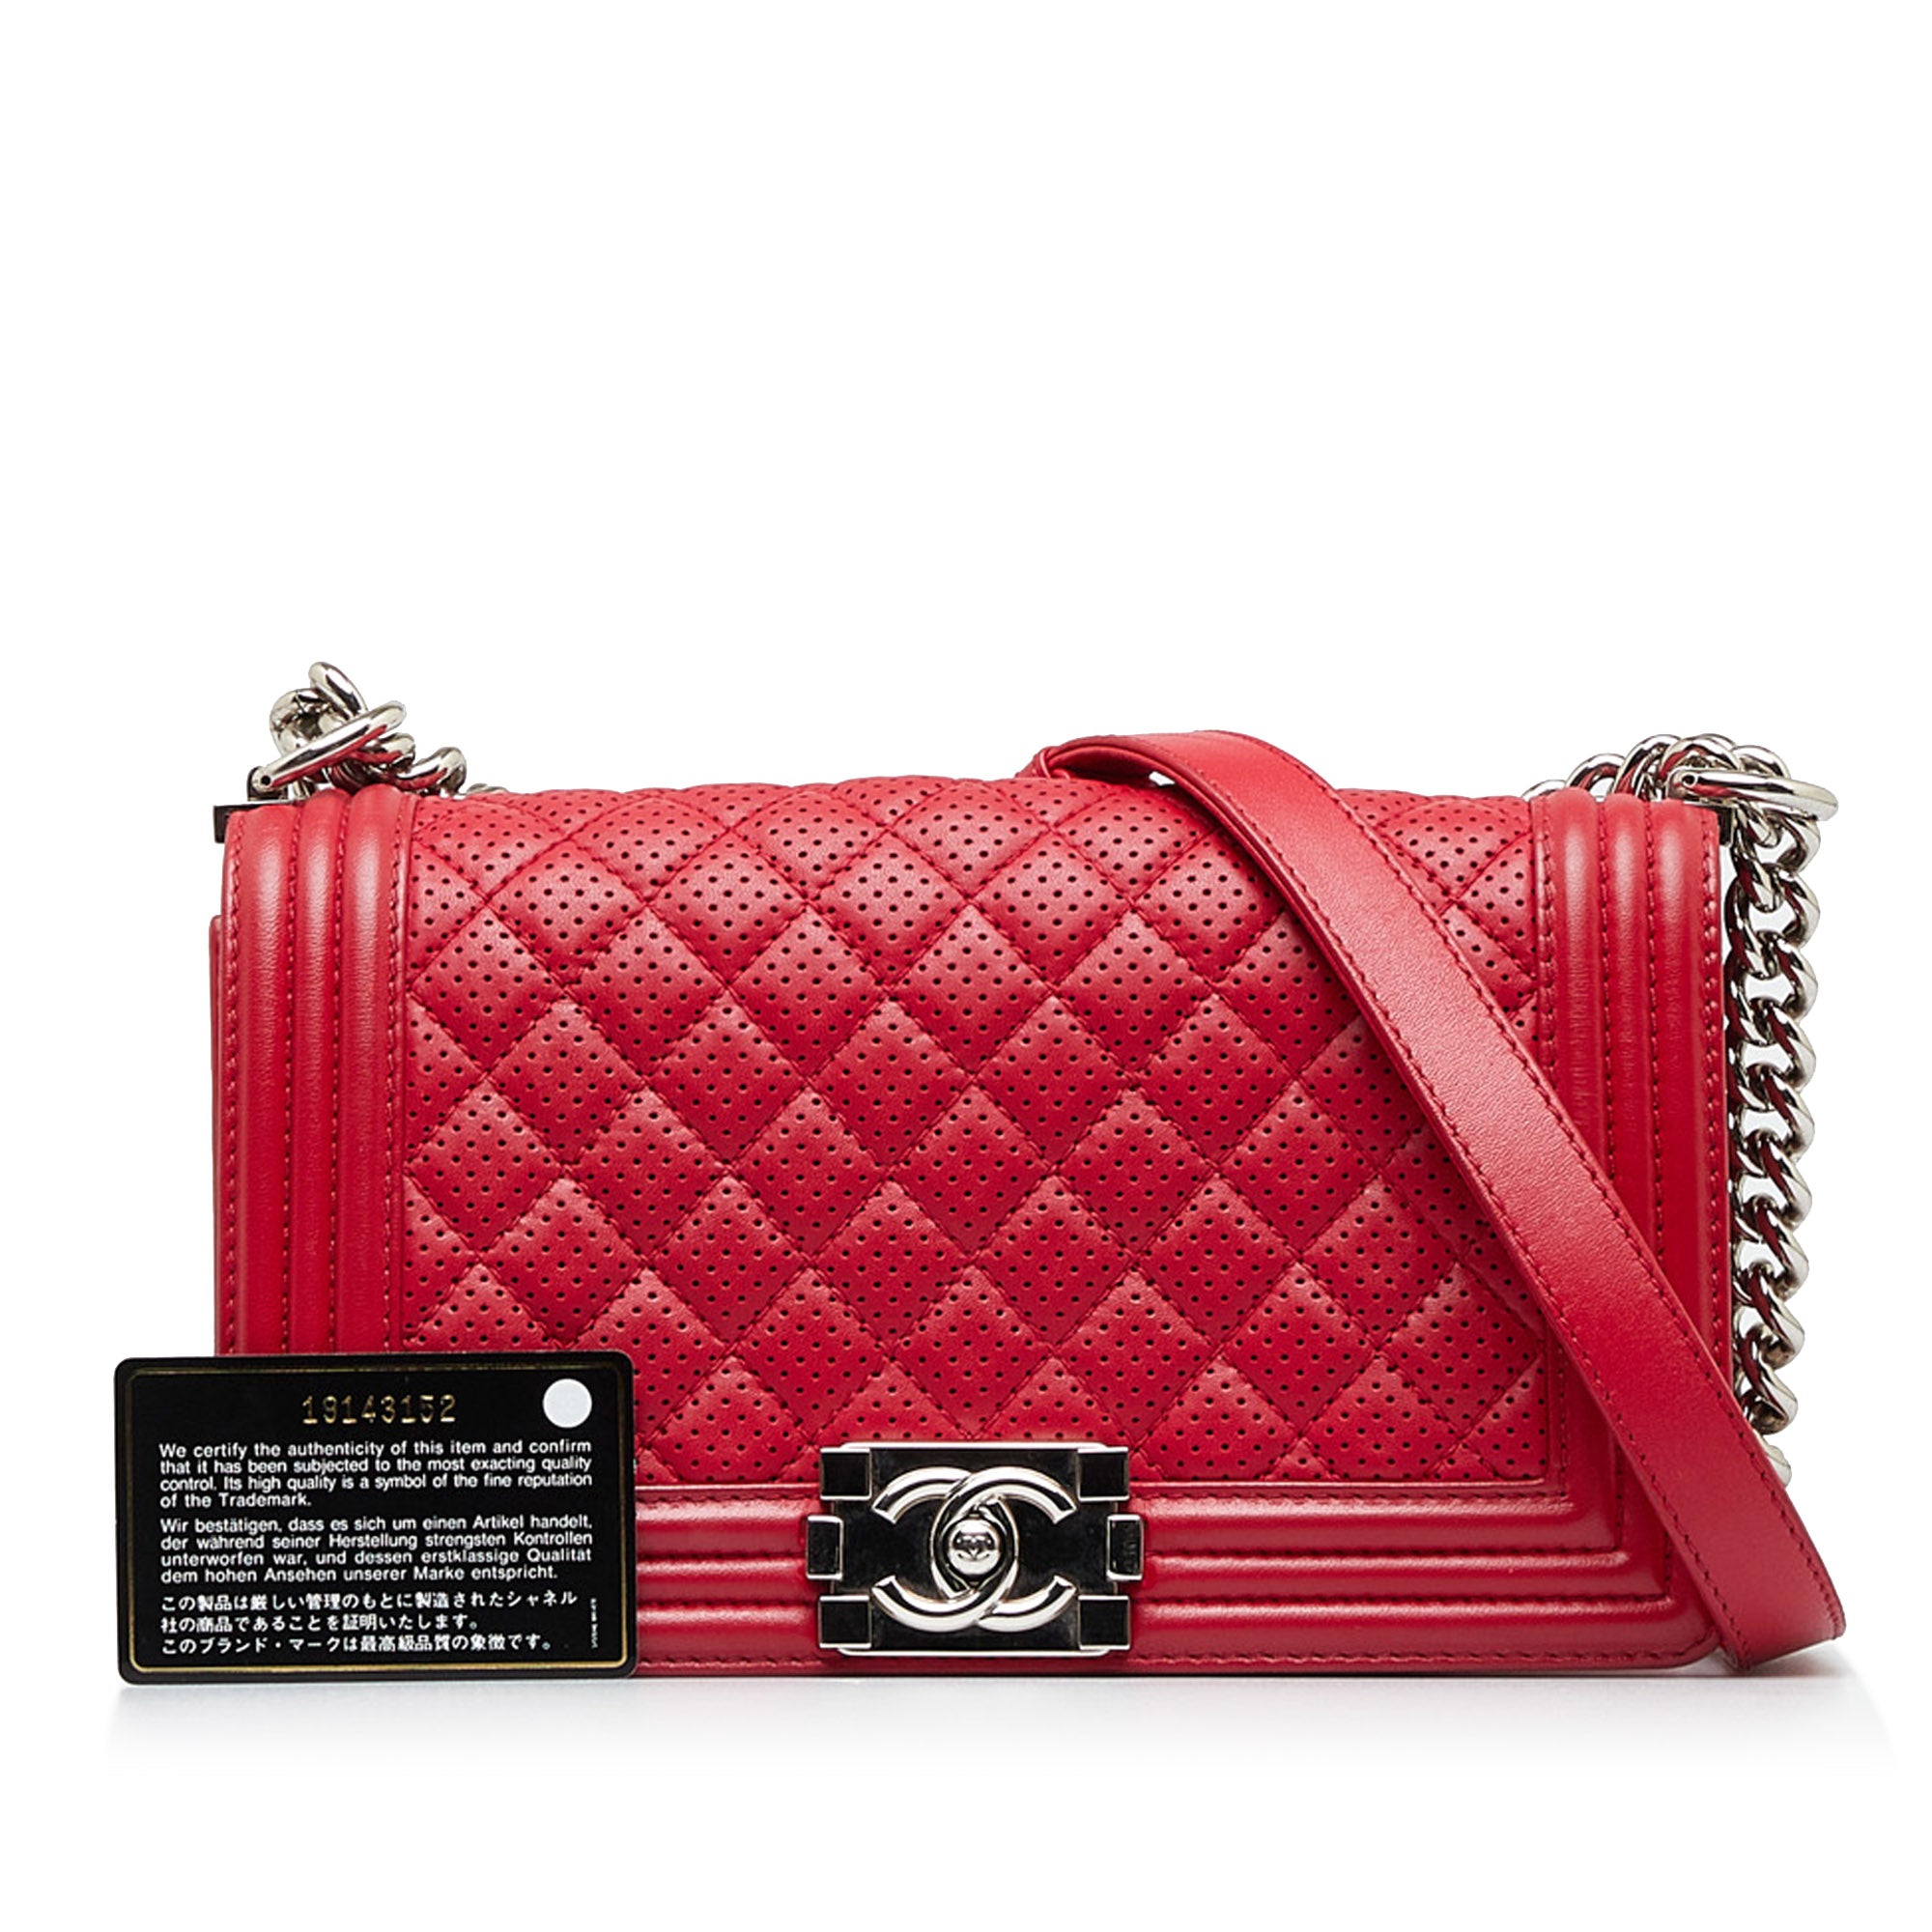 chanel perforated flap bag